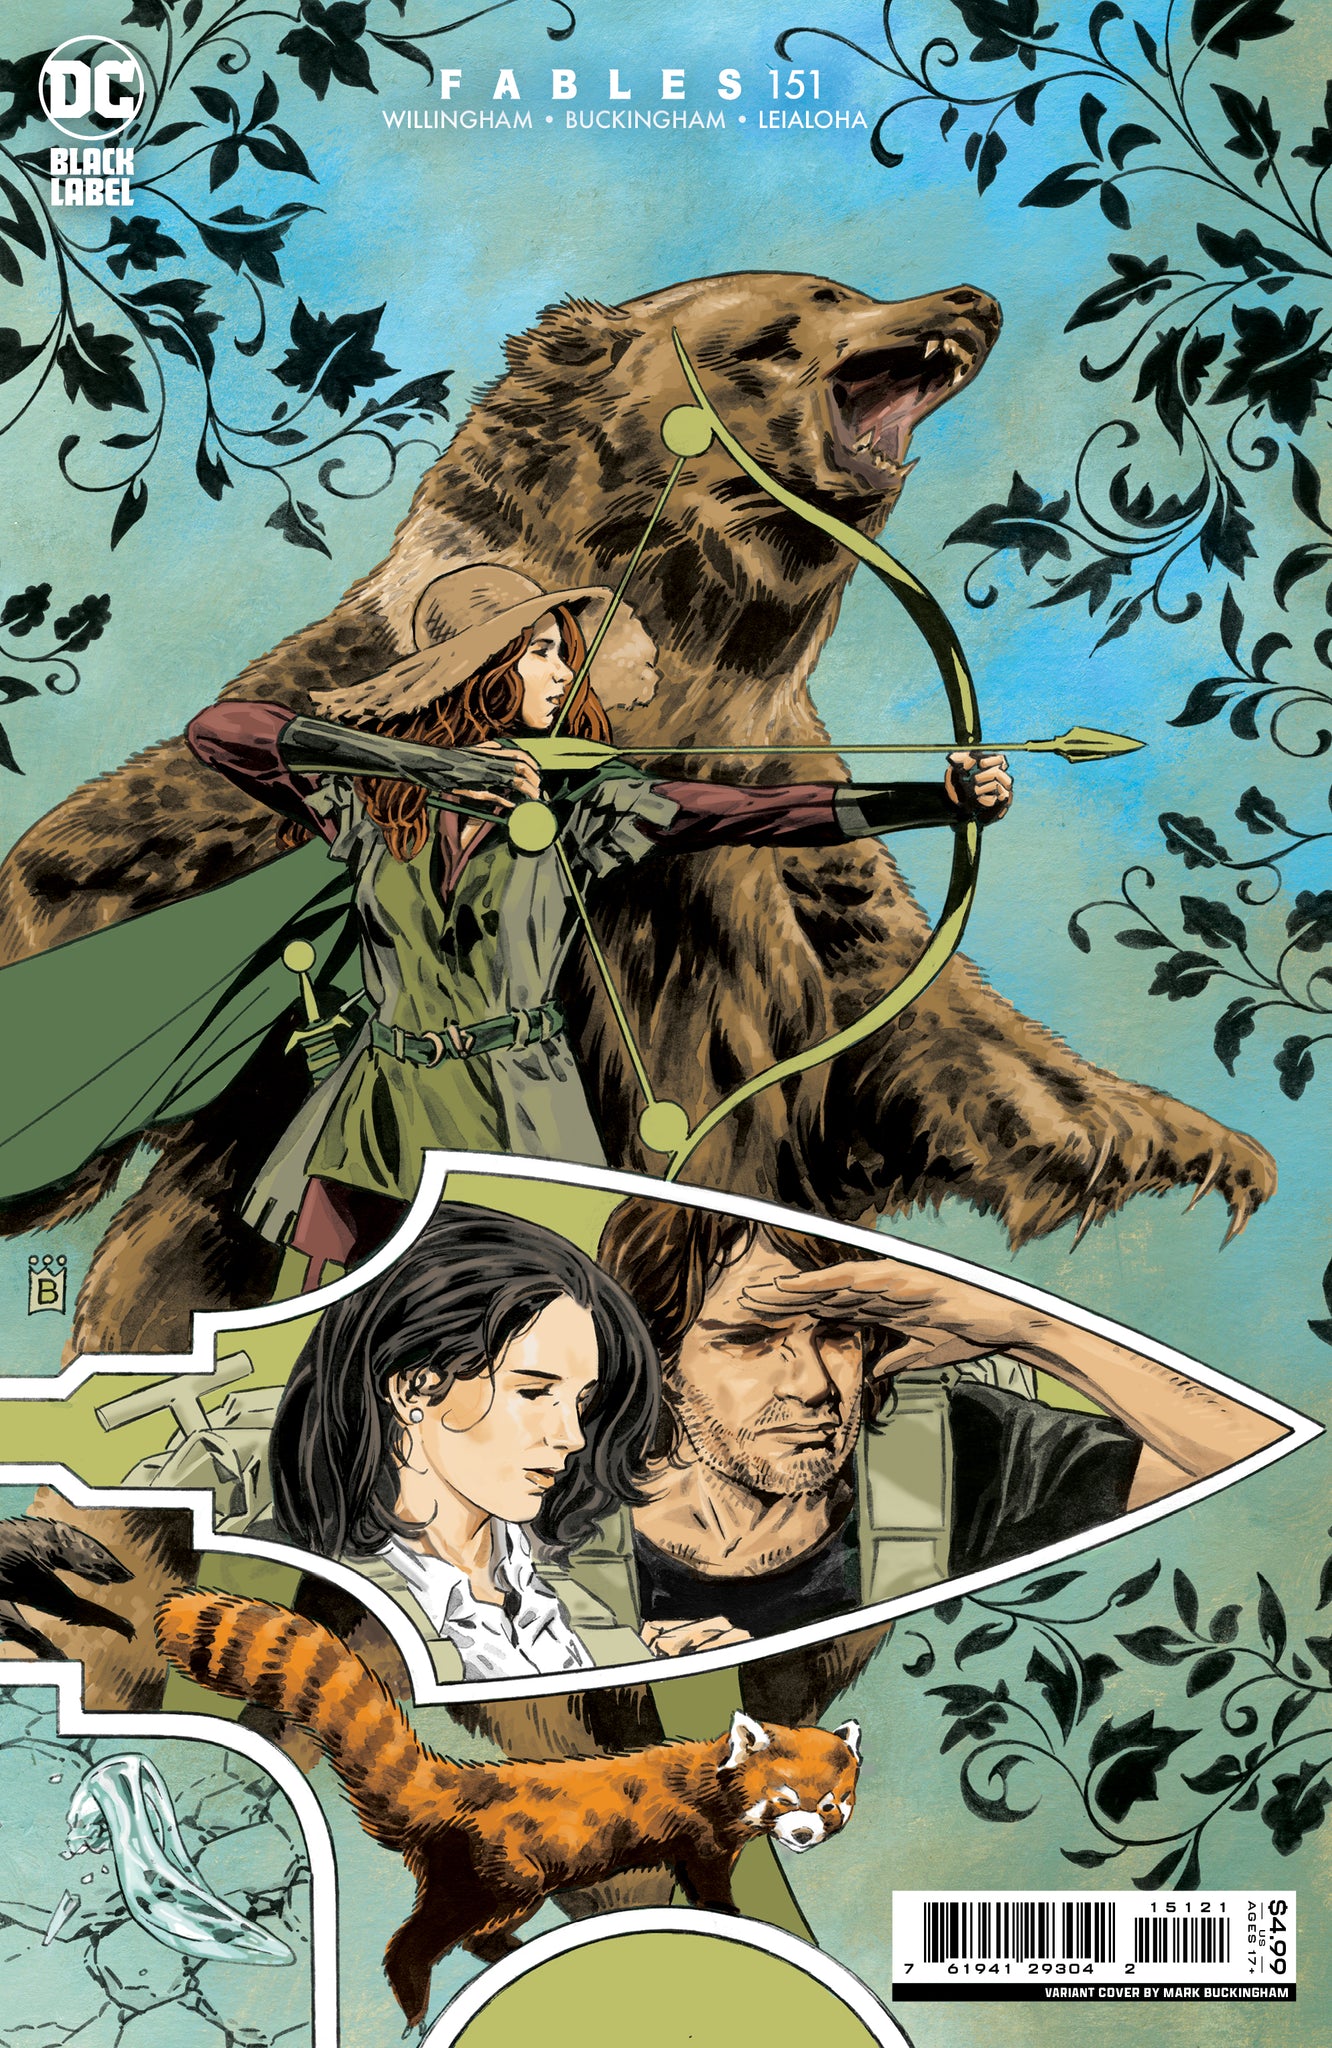 FABLES #151